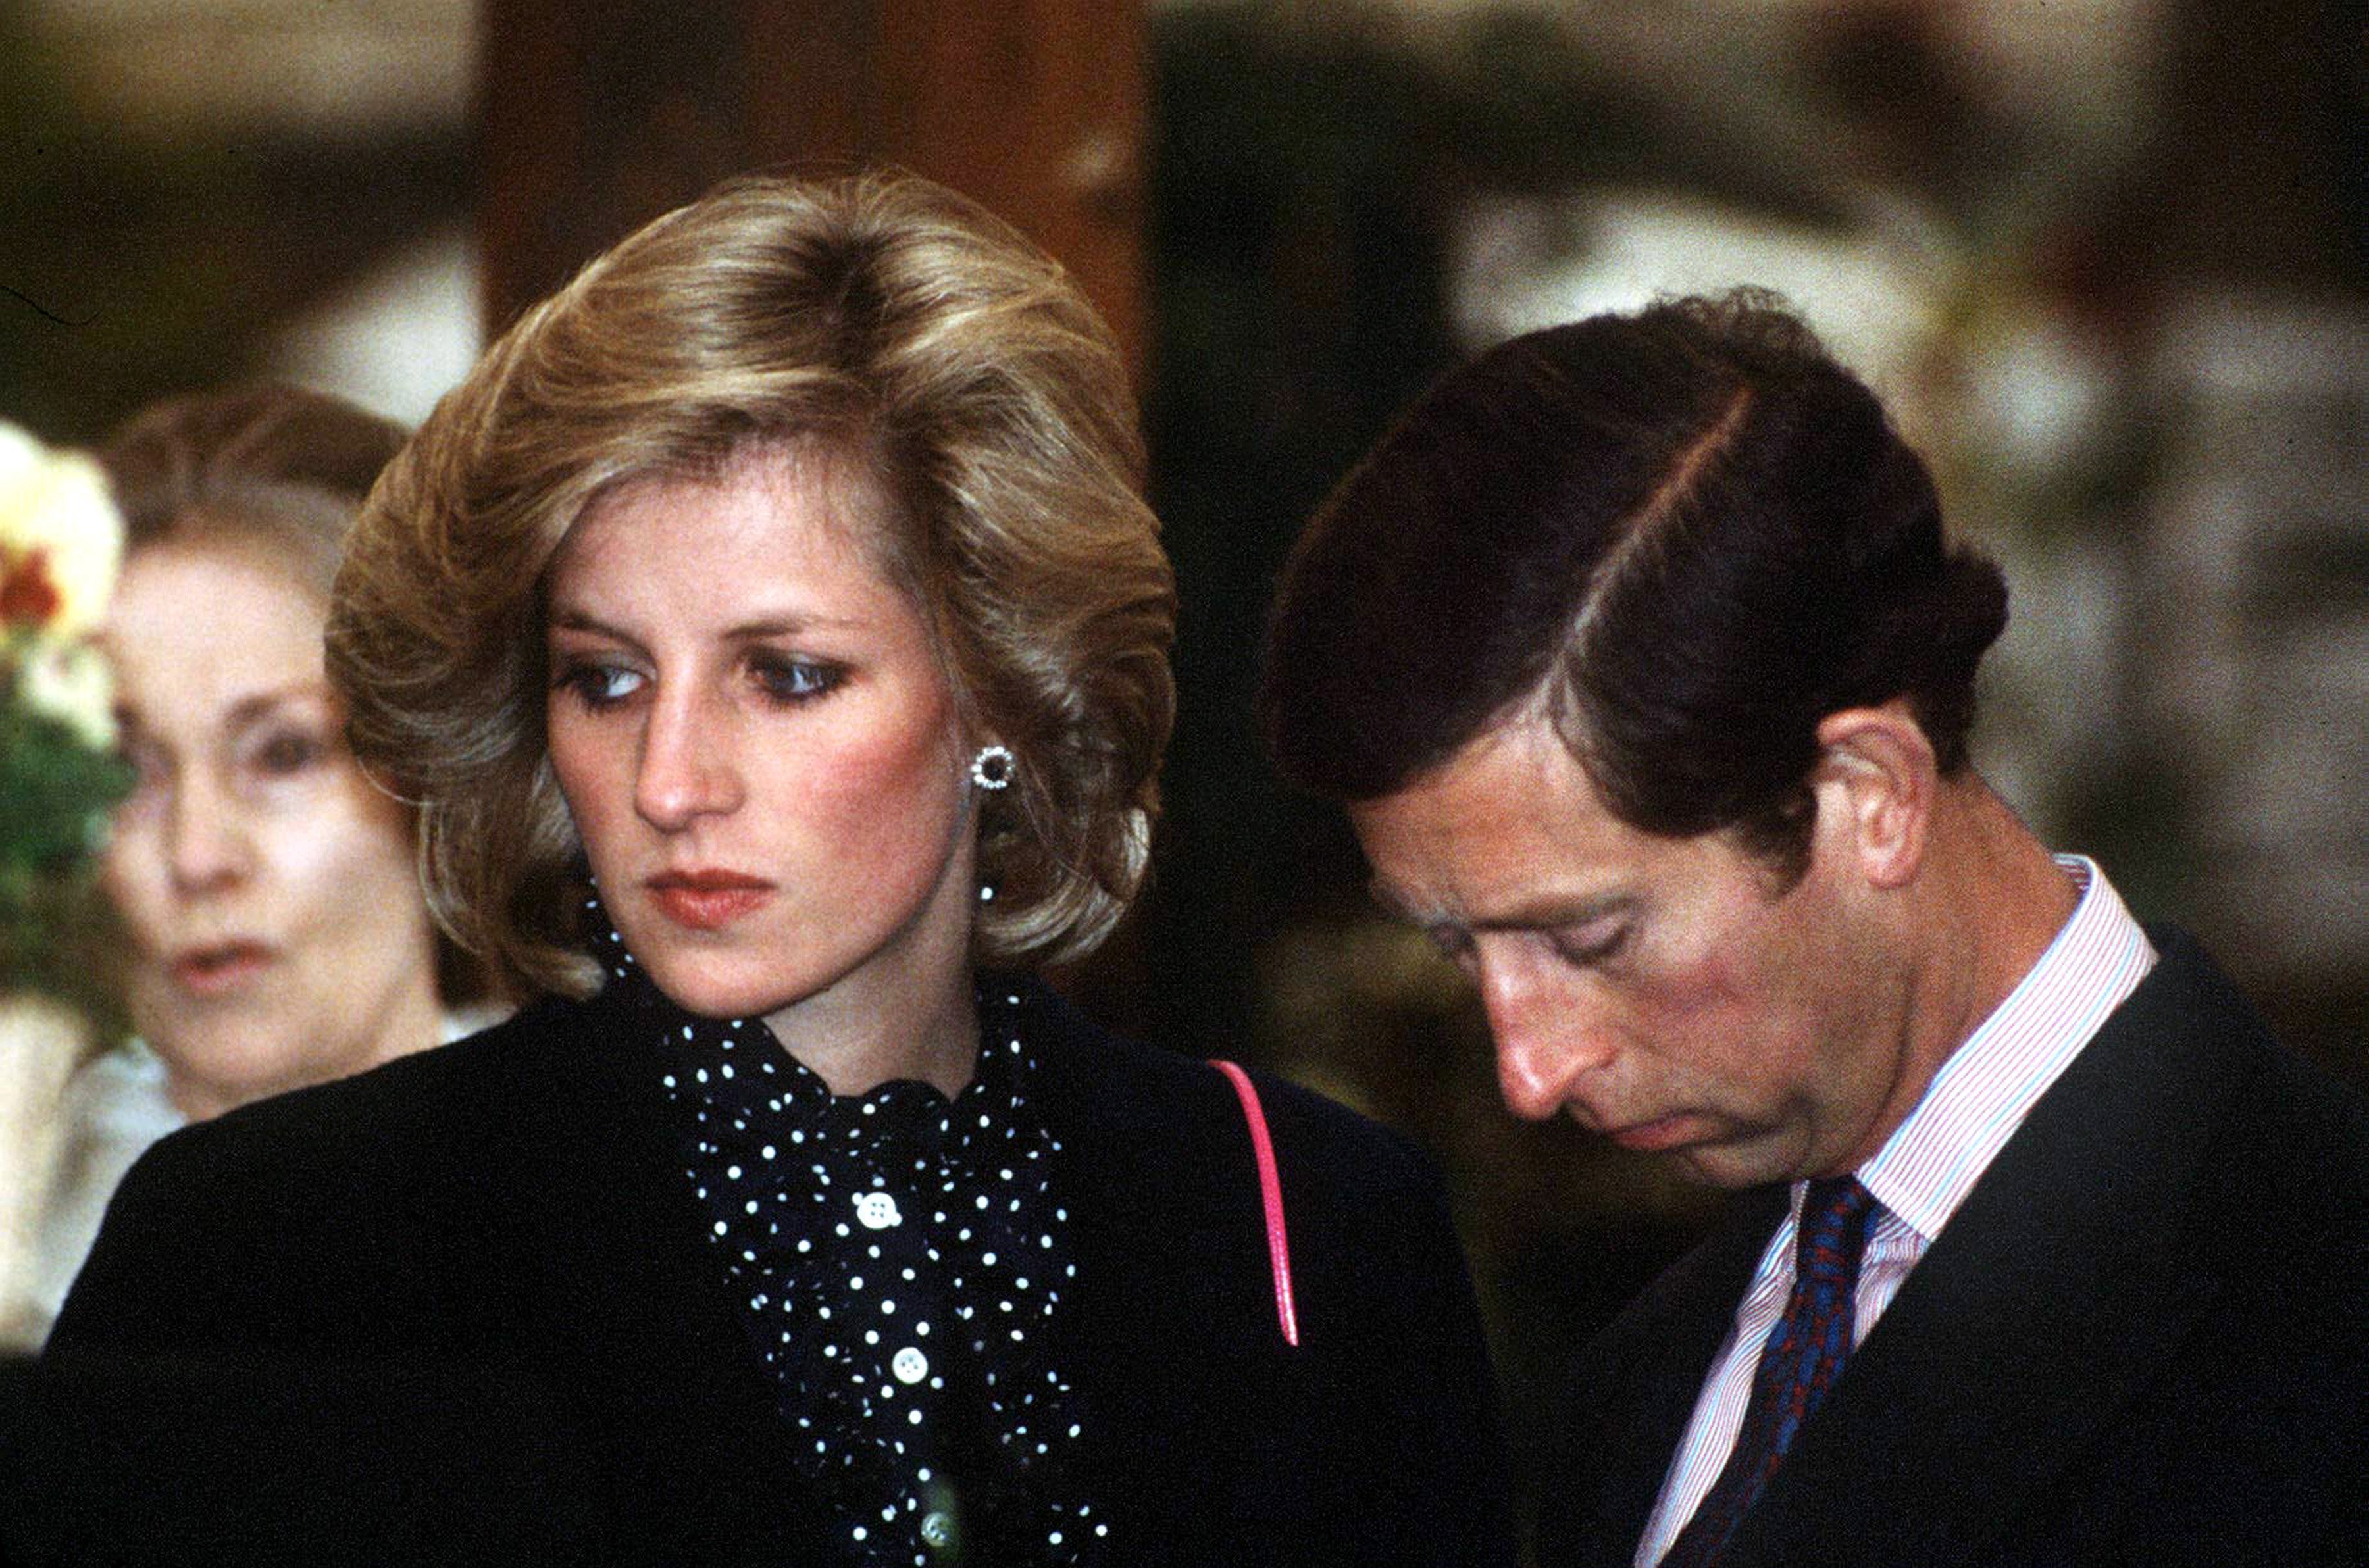 Prince Charles and Princess Diana at the Chelsea Flower Show, London, May 1984 | Source: Getty Images